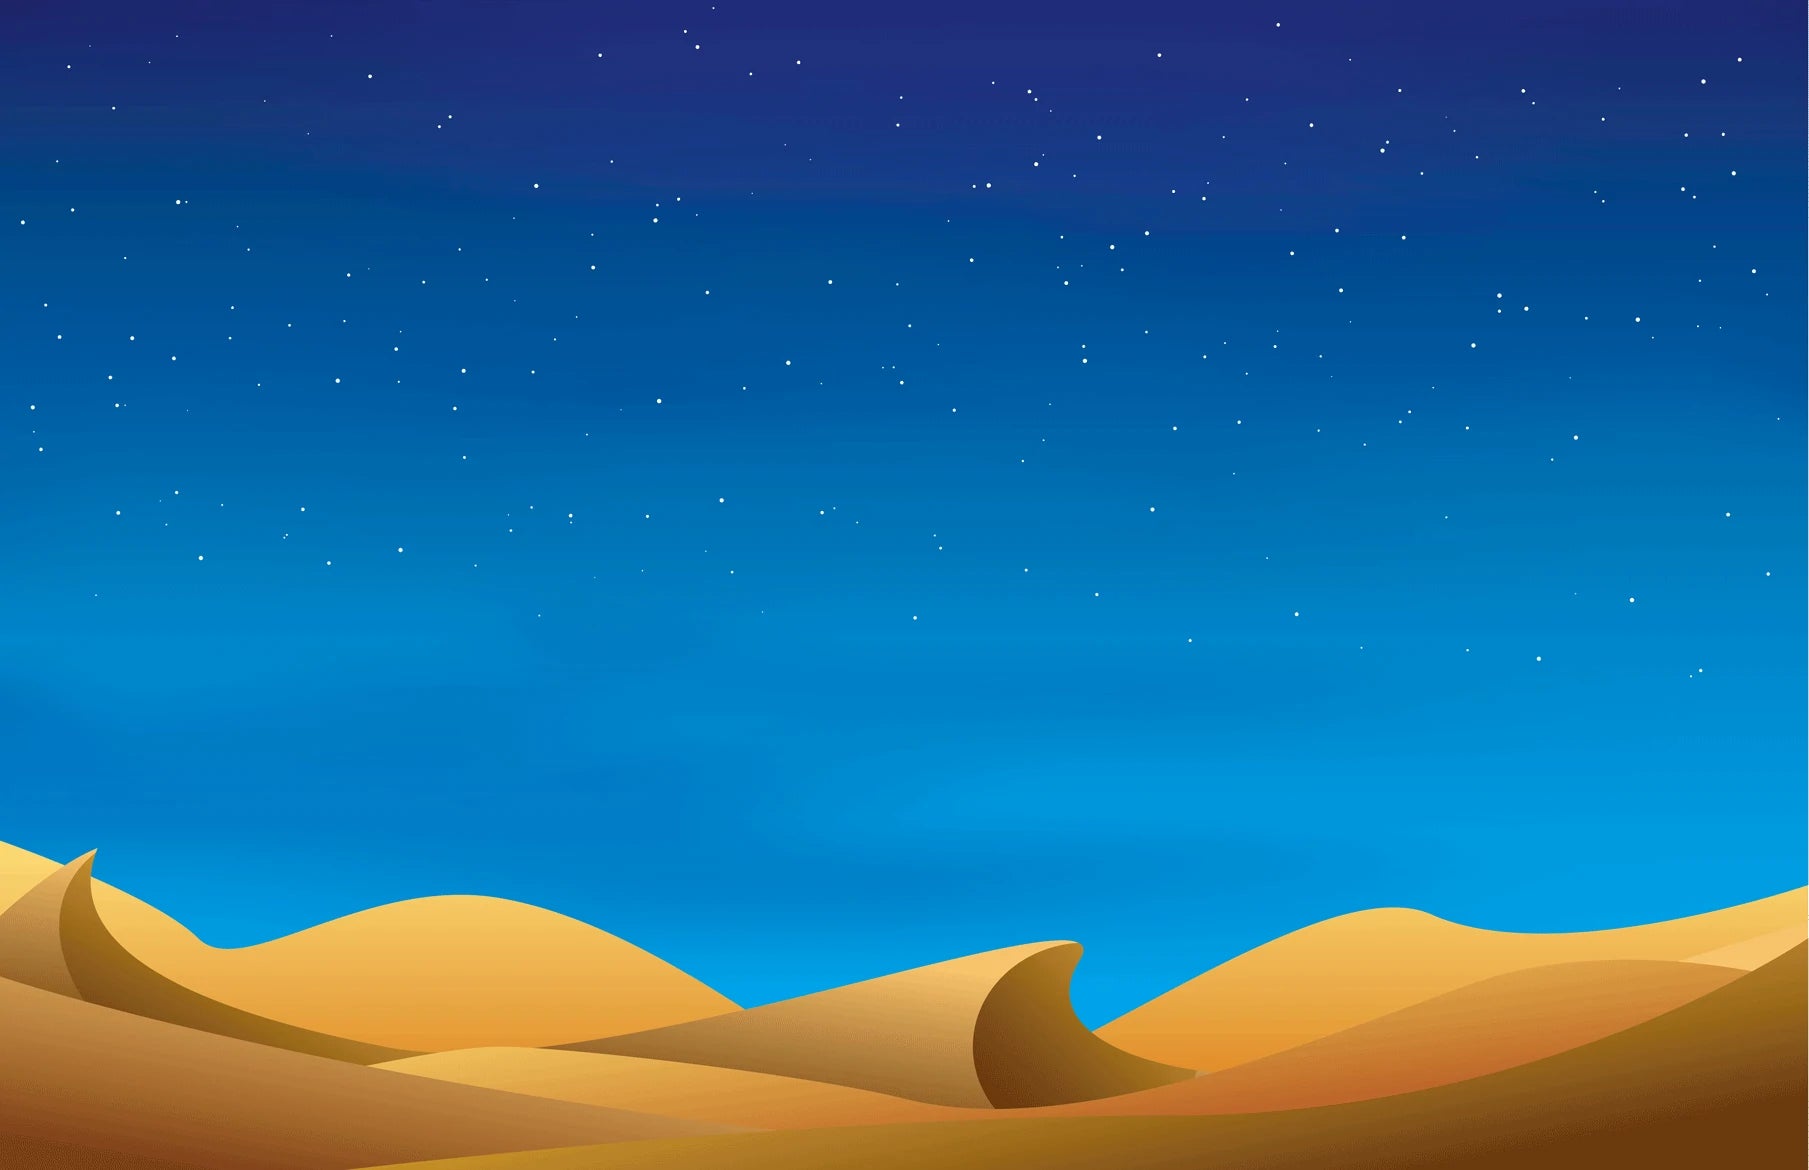 Wallpaper mural featuring a starry desert night for use in home decor